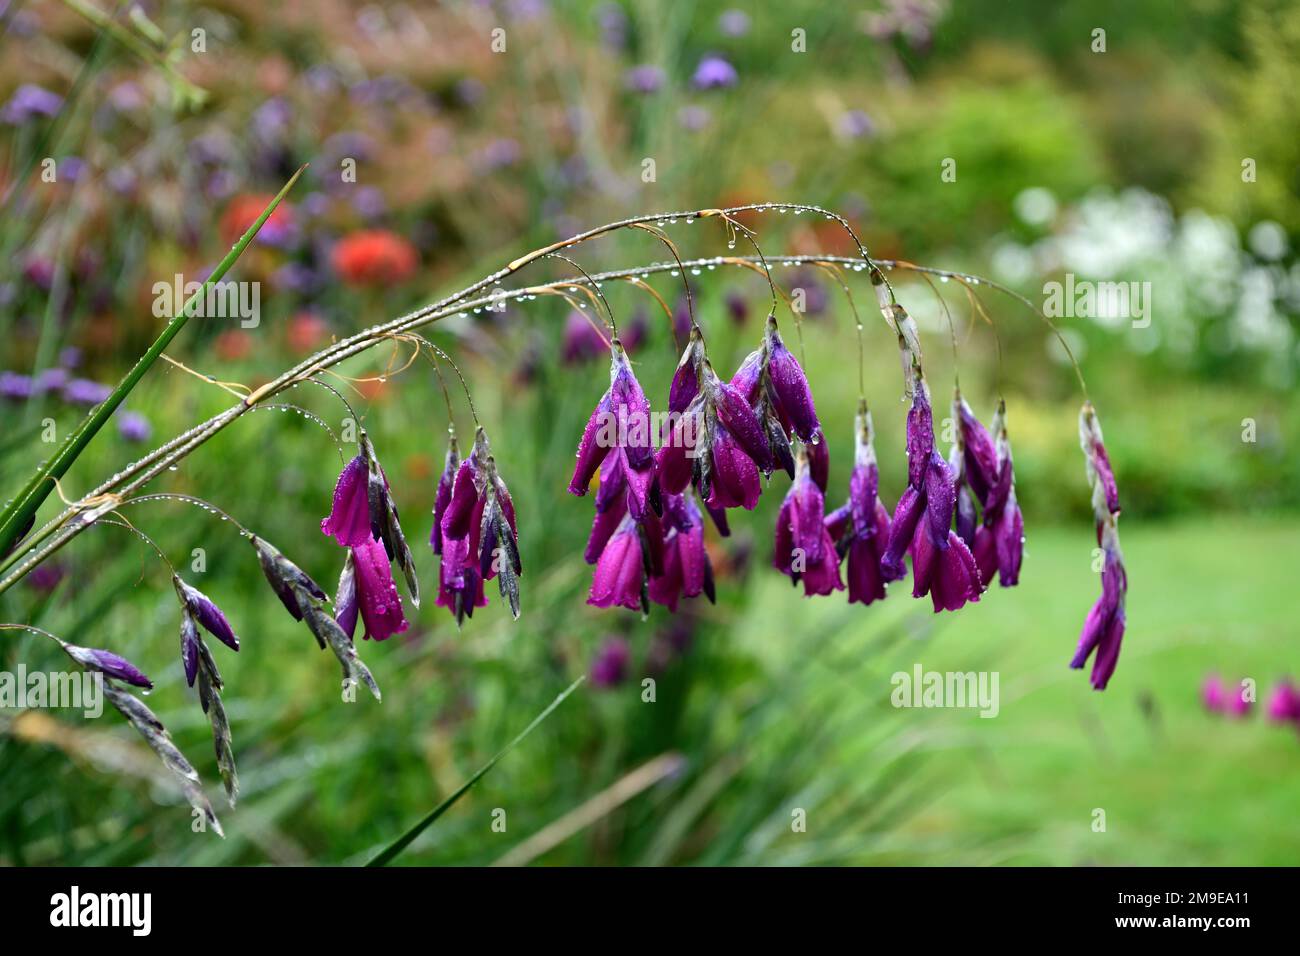 dierama pulcherrimum,pink purple  flowers,flower,perennials,arching,dangling,hanging,bell shaped,angels  fishing rods,RM Floral Stock Photo - Alamy